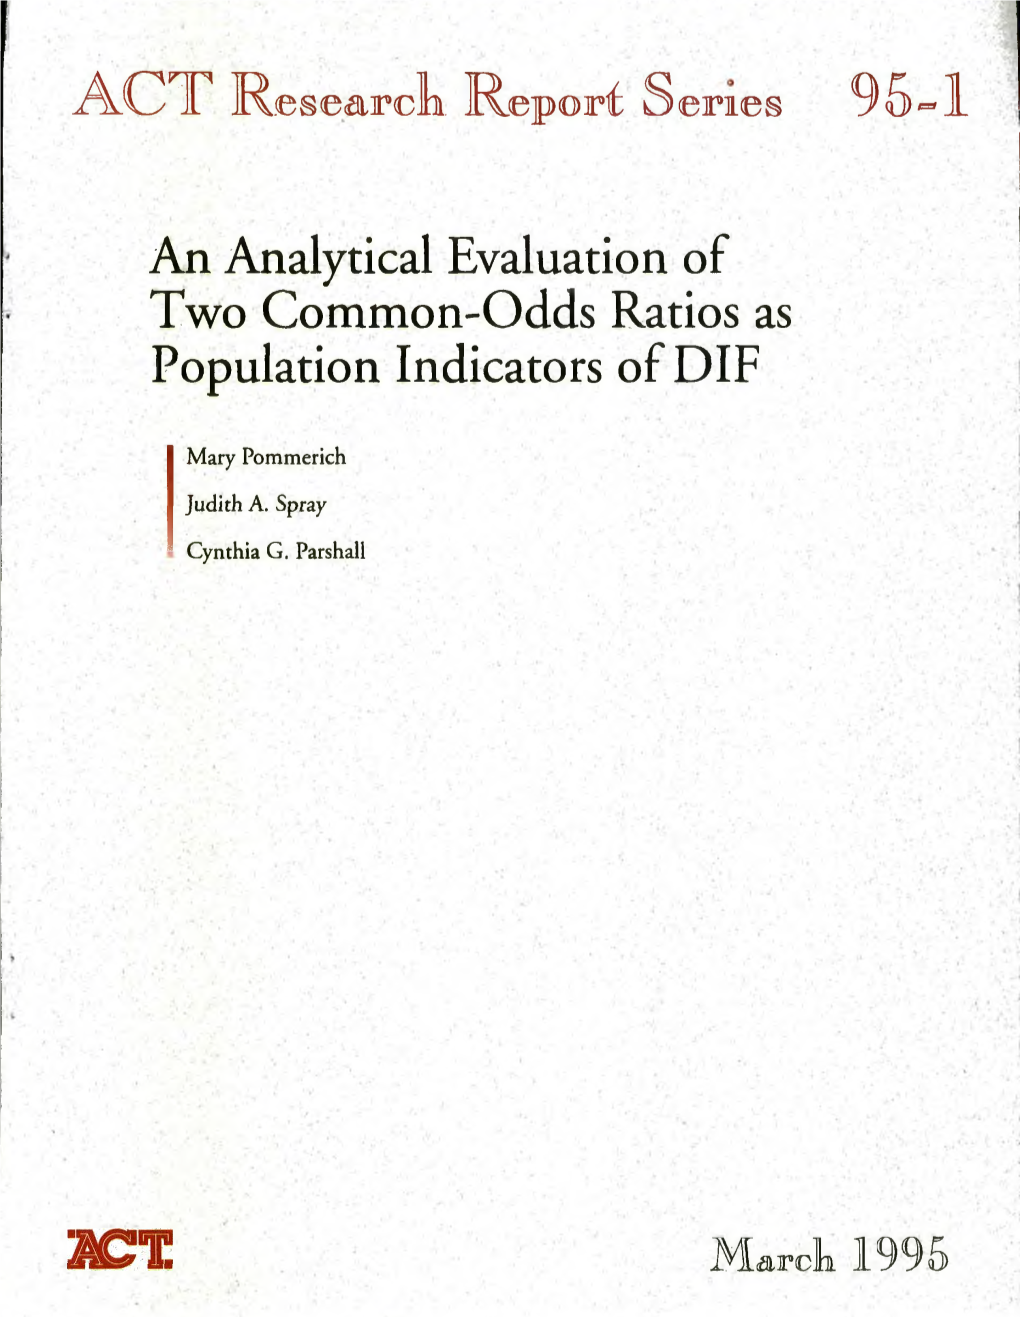 An Analytical Evaluation of Two Common-Odds Ratios As Population Indicators of DIF